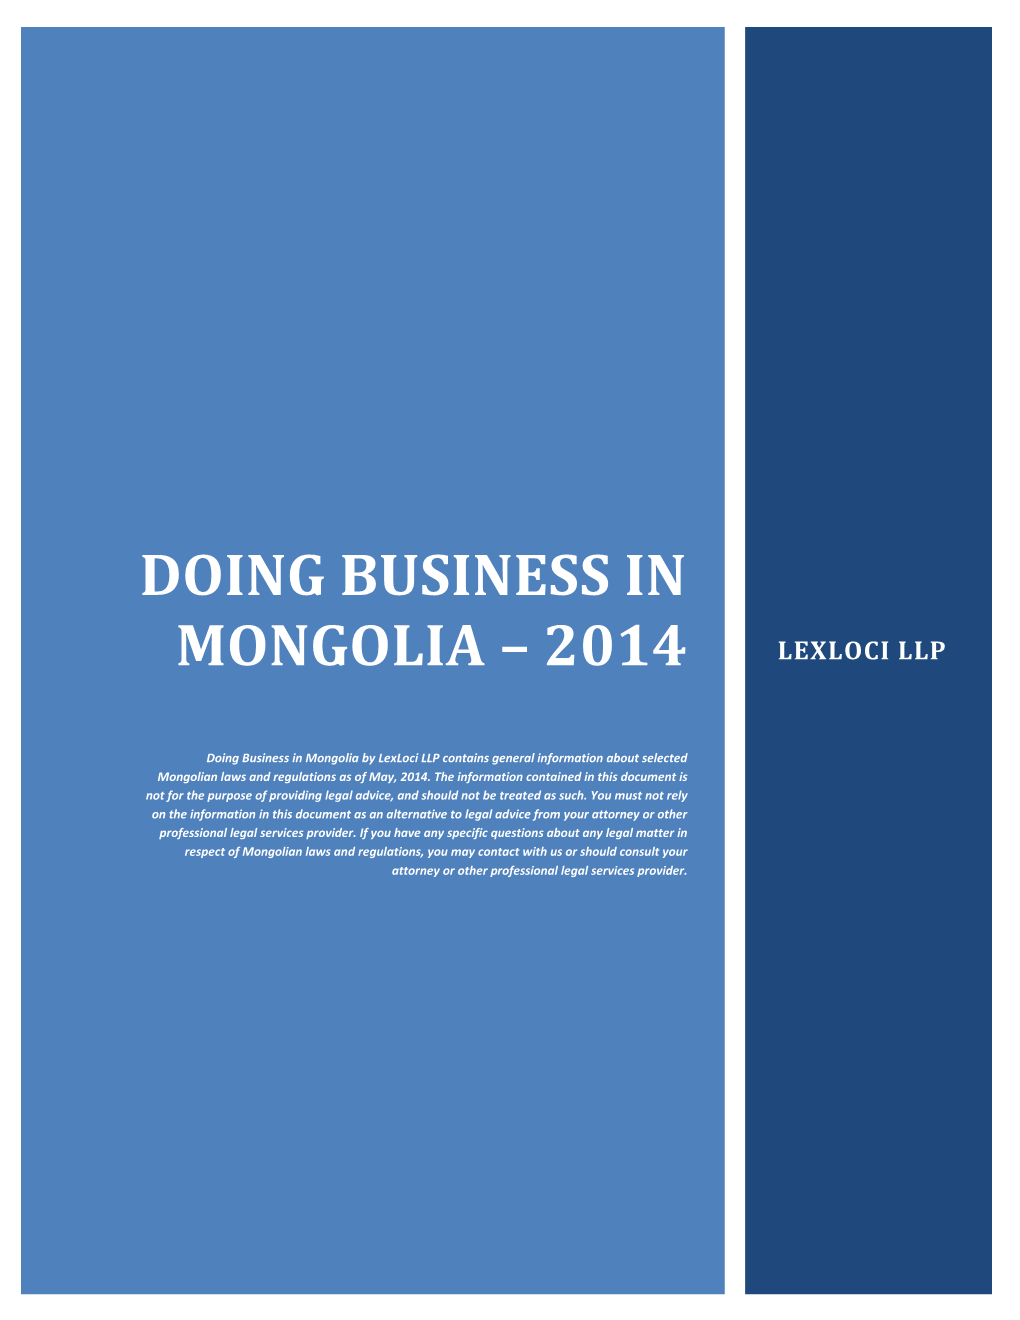 Doing Business in Mongolia by Lexloci LLP Contains General Information About Selected Mongolian Laws and Regulations As of May, 2014